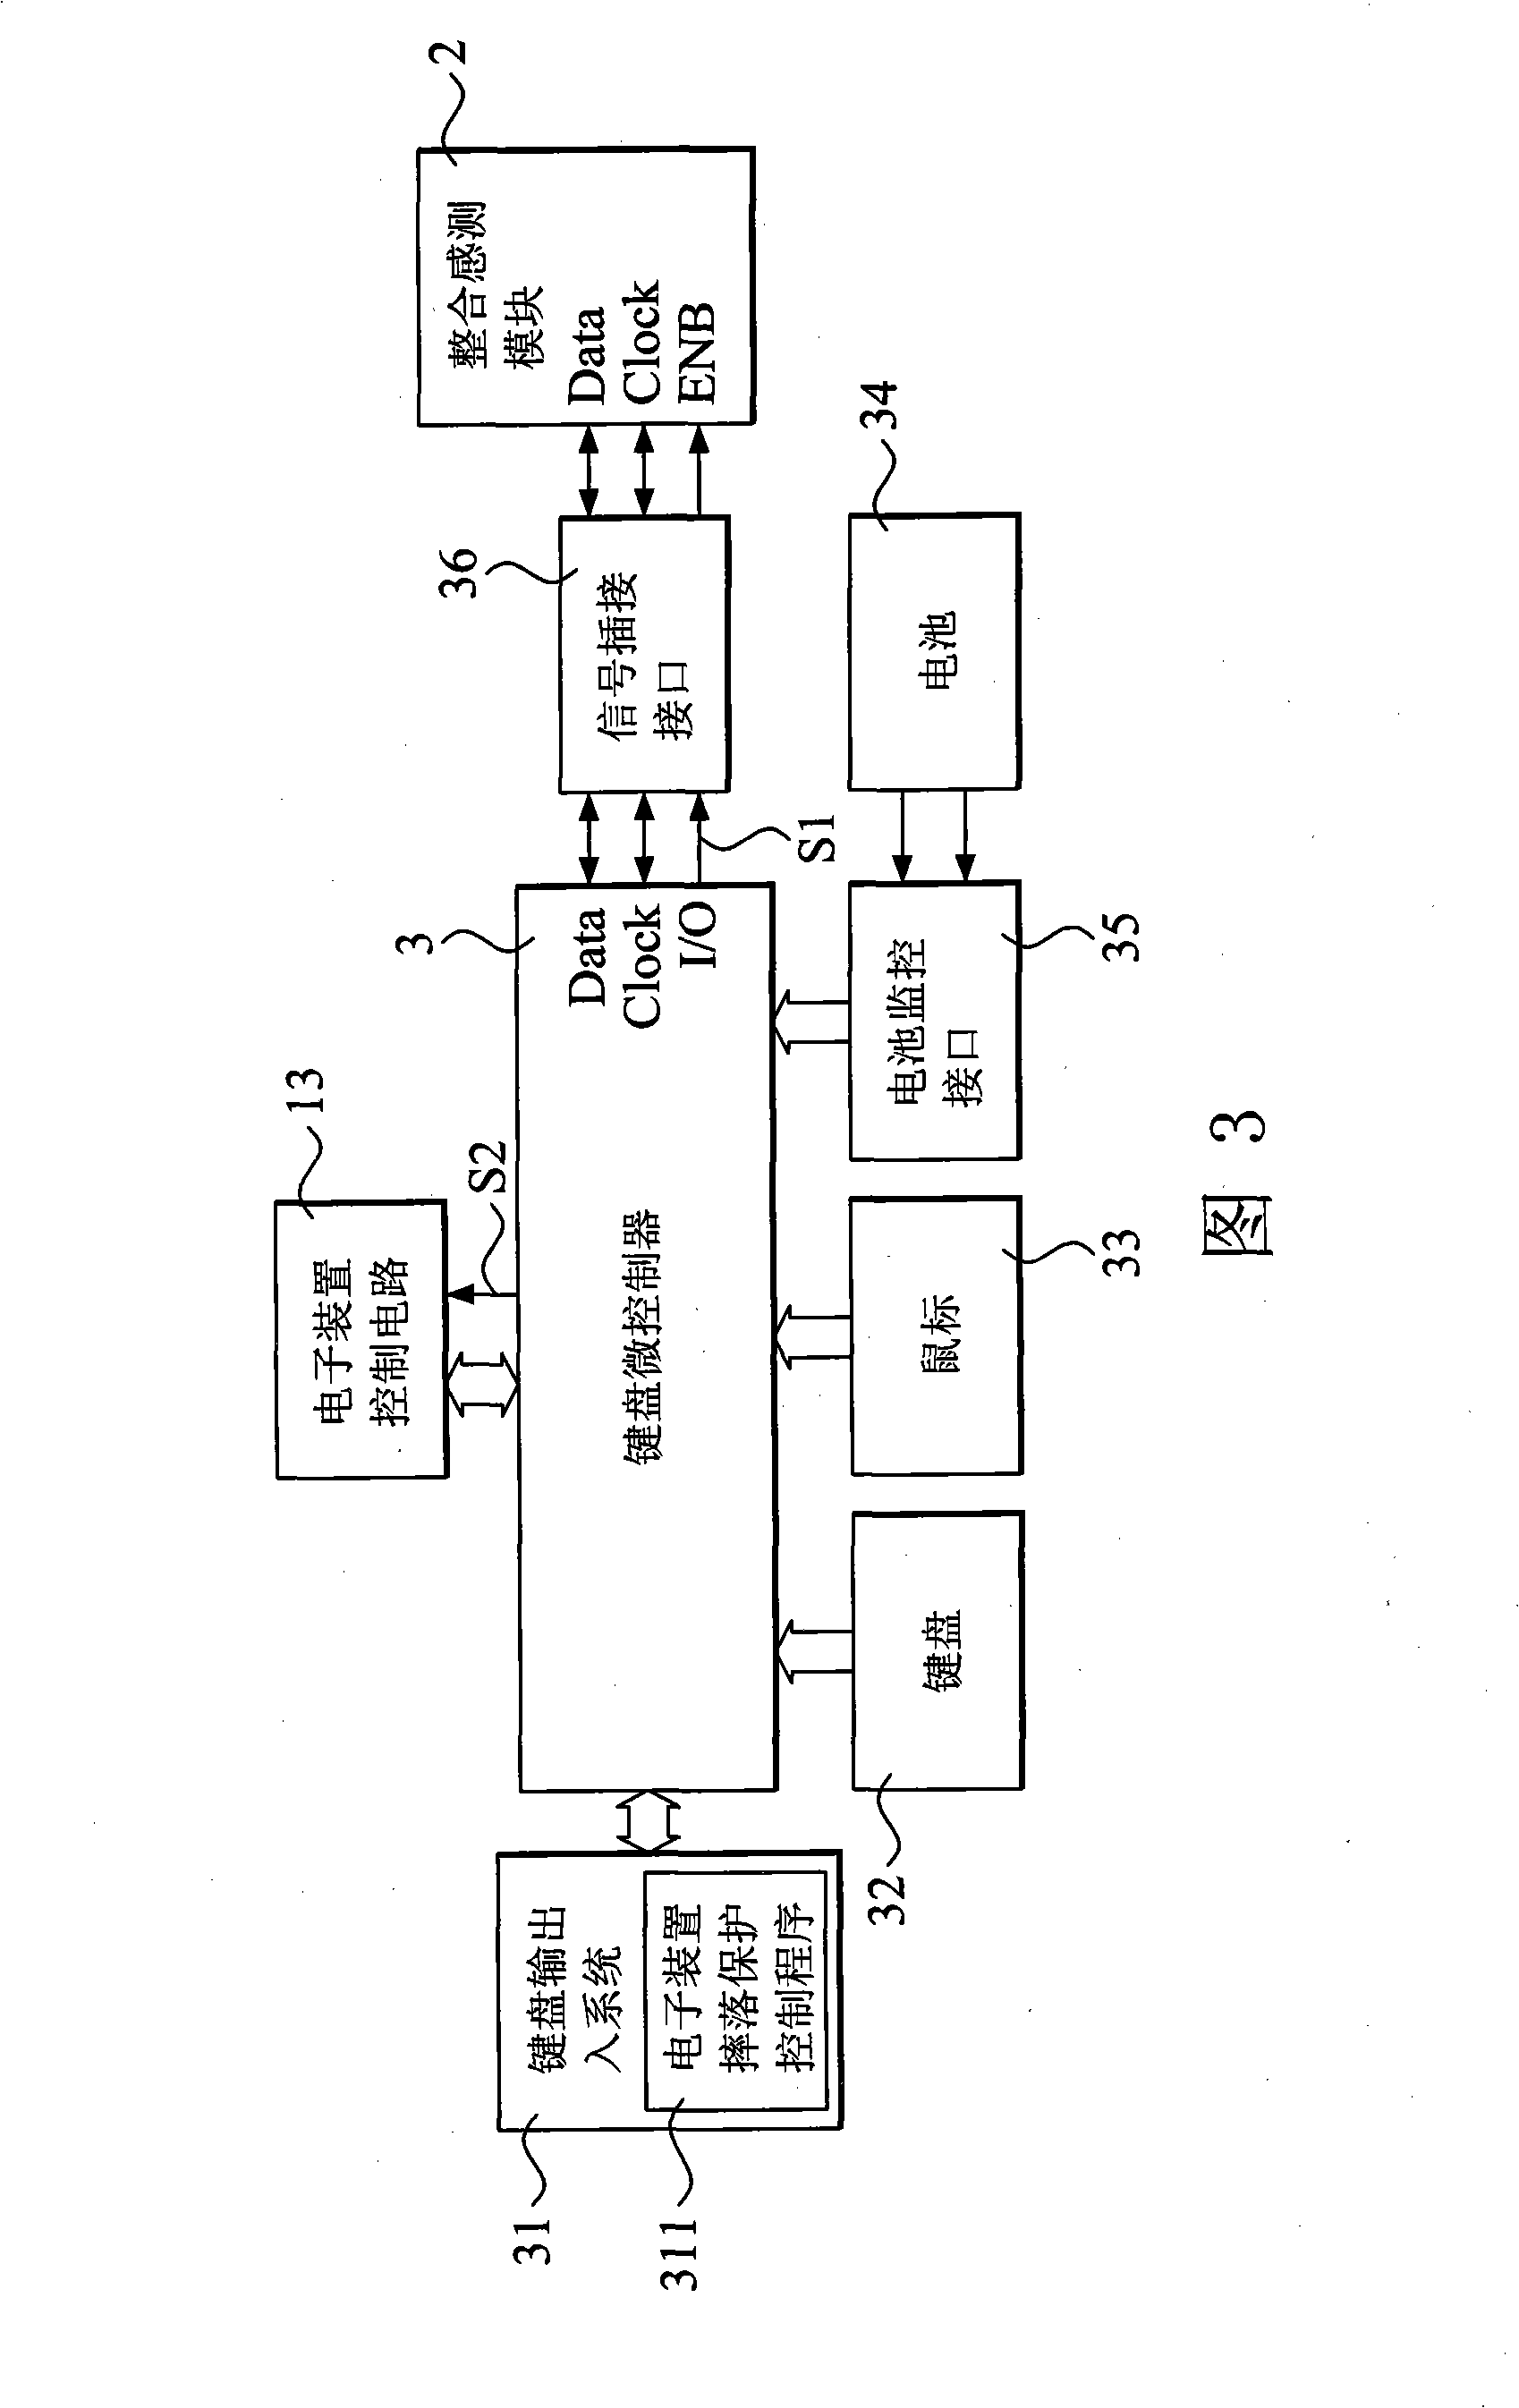 Integration sensing module capable of separating as movement sensing and electronic device falling protection